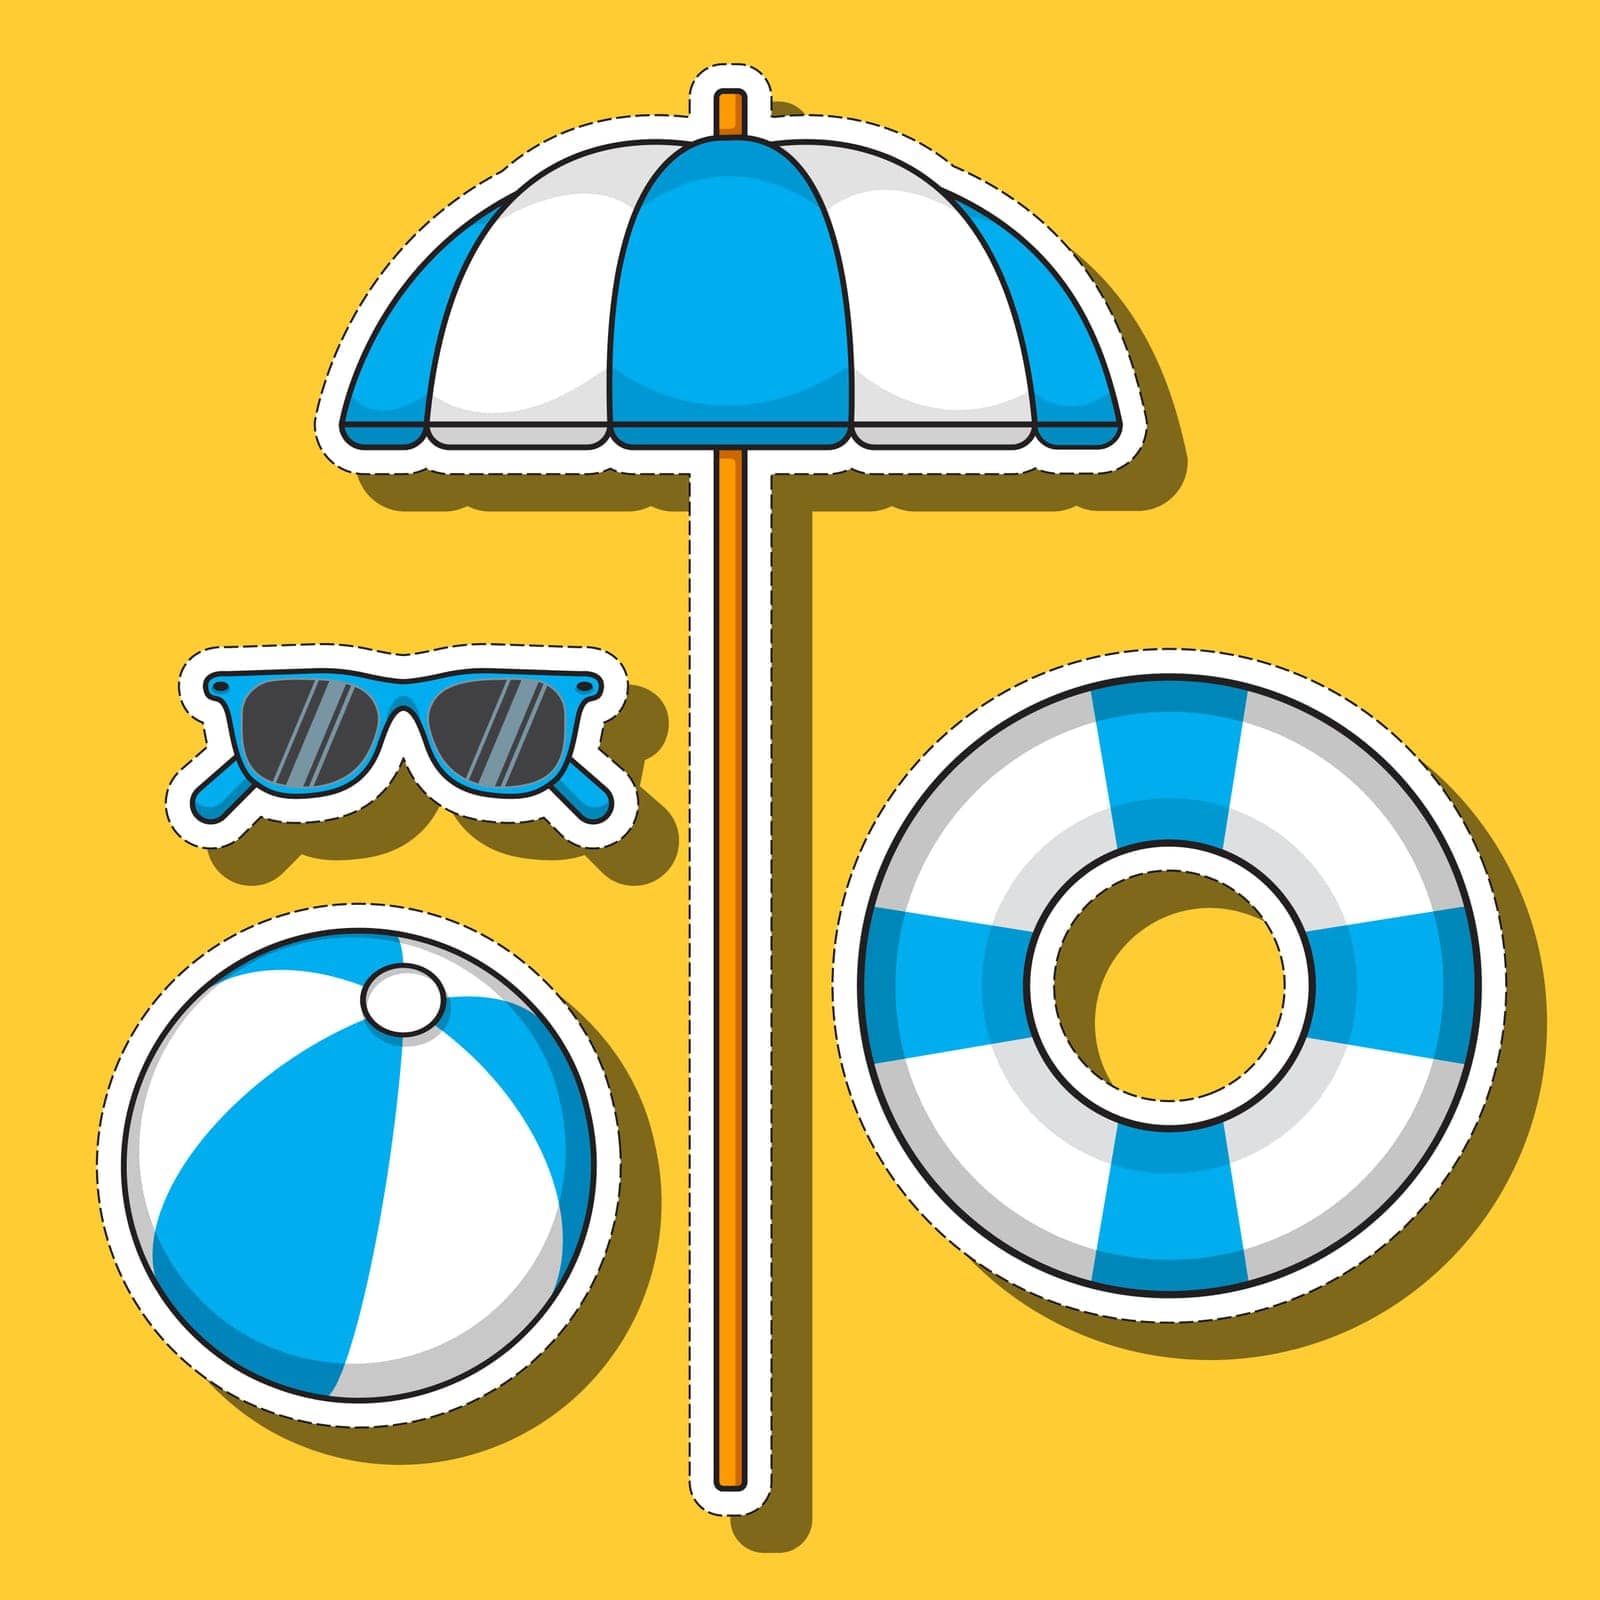 Cartoon sticker set. Beach umbrella, sunglasses, beach ball and life buoy, blue and white striped, on a yellow background. Vector illustration.